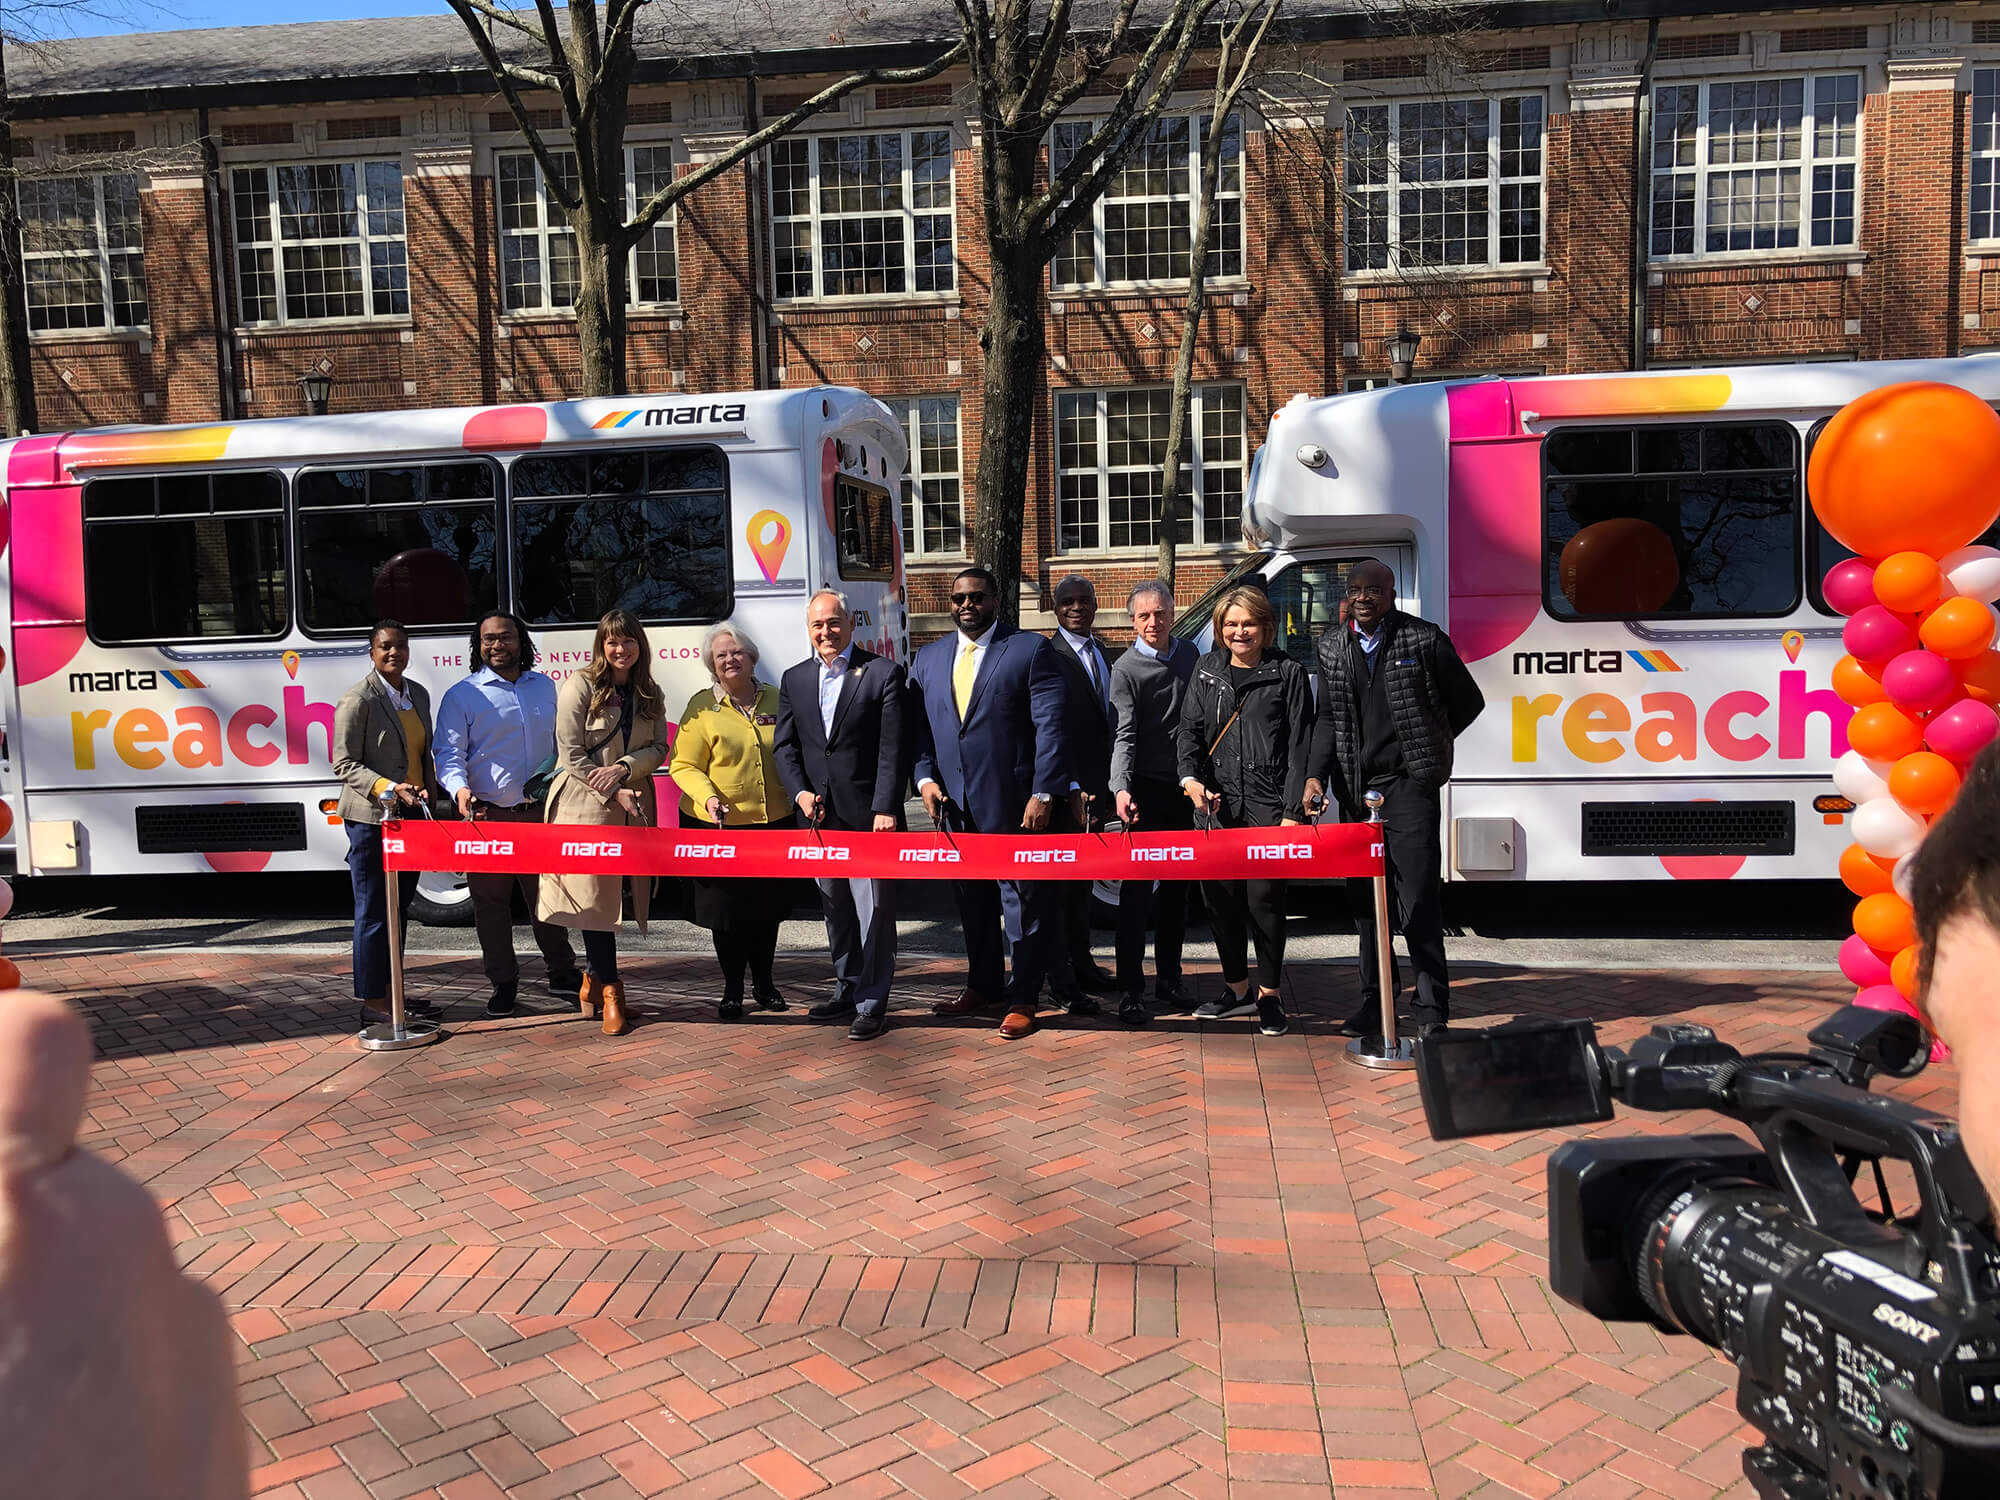 MARTA Reach Pilot Bridges First-and-Last Mile Connections for Transit Riders